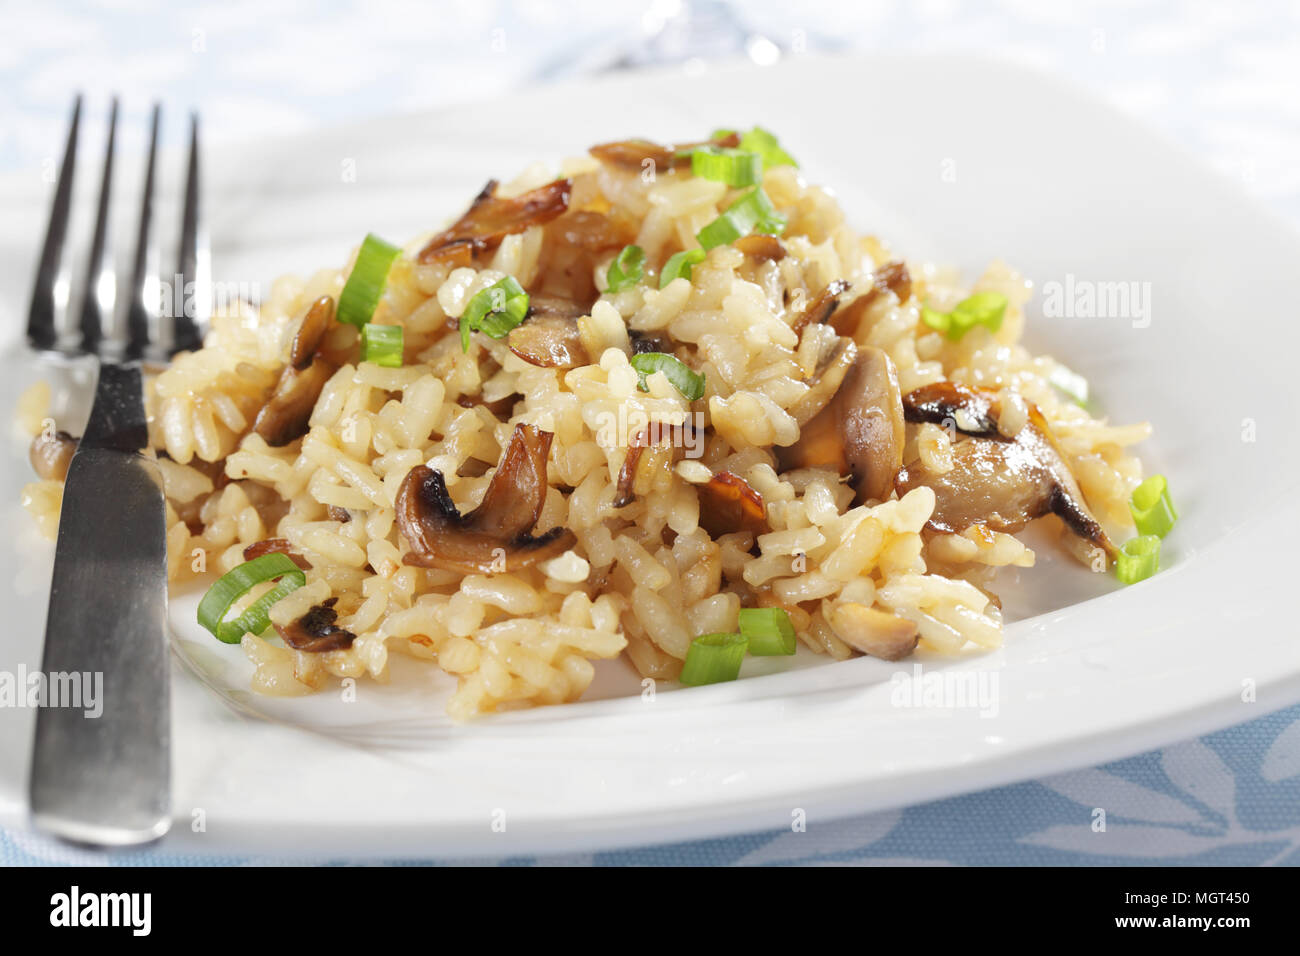 Risotto with mushrooms closeup Stock Photo